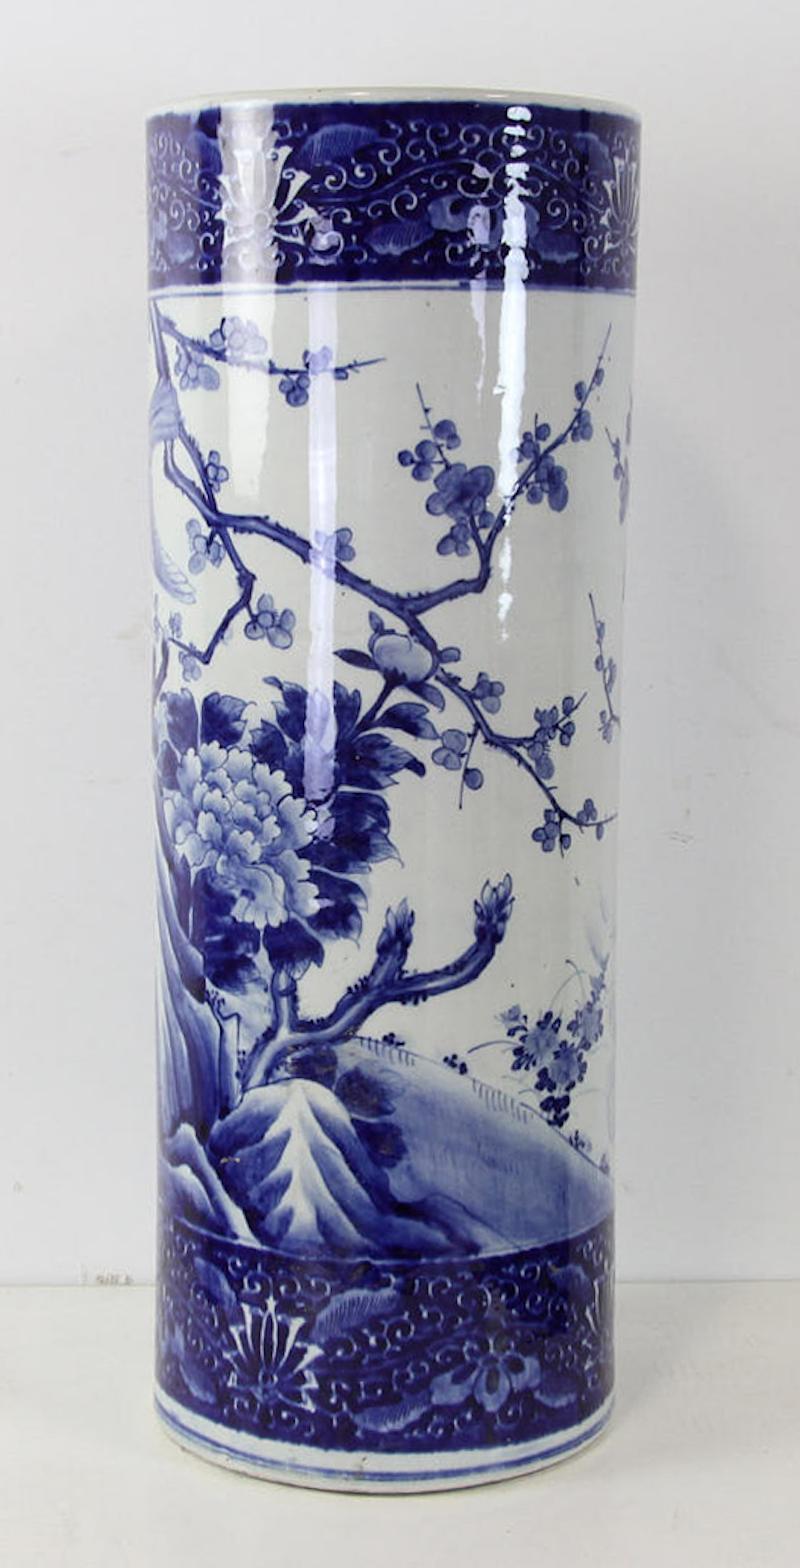 Antique Japanese Imari umbrella stand, Cobalt Blue, and white with banded design around the top and bottom. DEcorated with branches of cherry blossoms, bird, and large chrysanthemum flowers. Measures 24